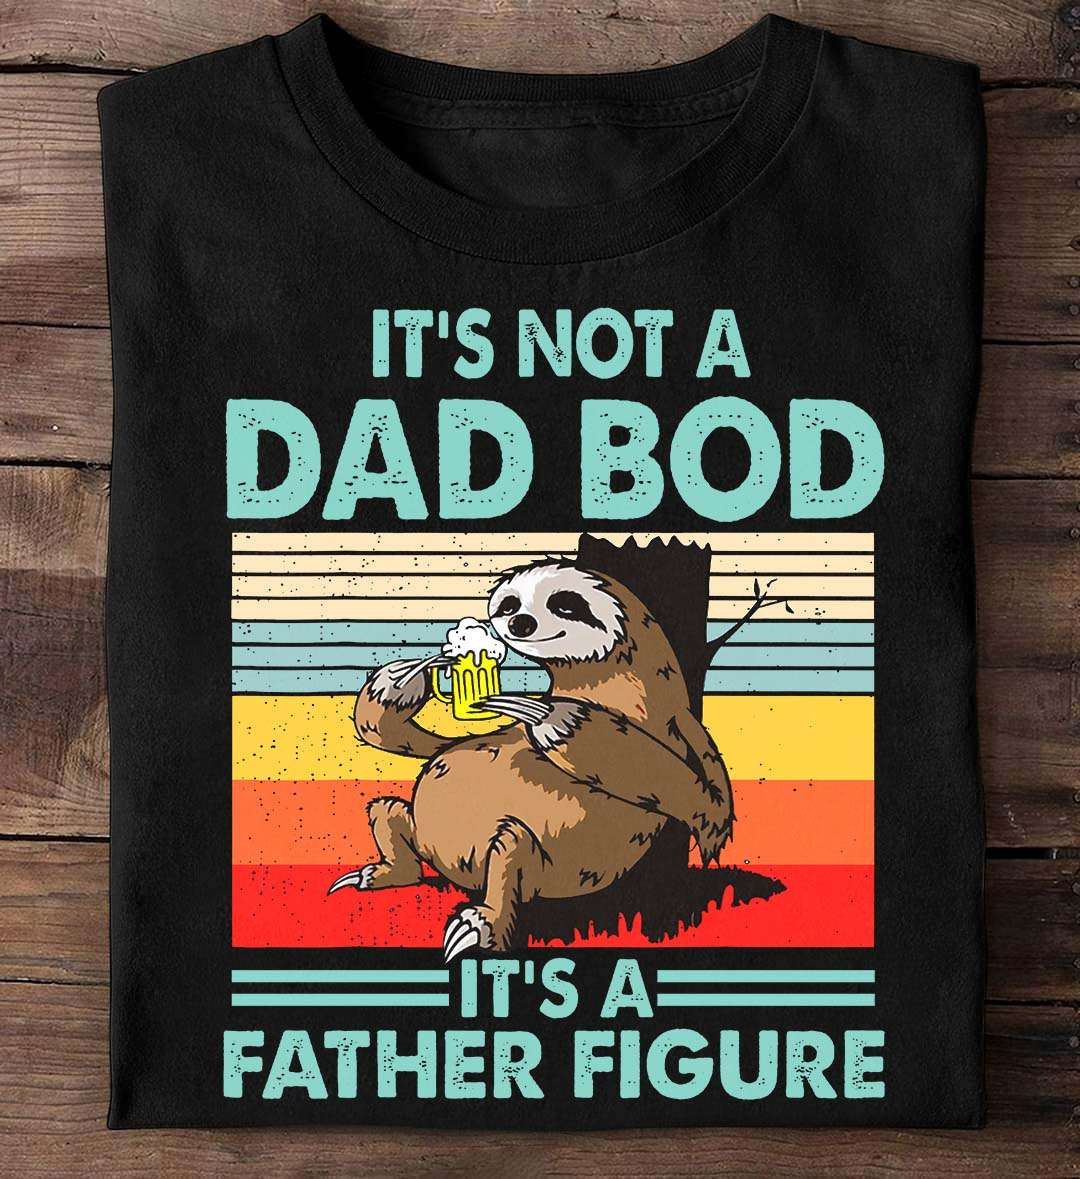 It's not a dad bod it's a father figure - Sloth drinking beer, sloth dad bod